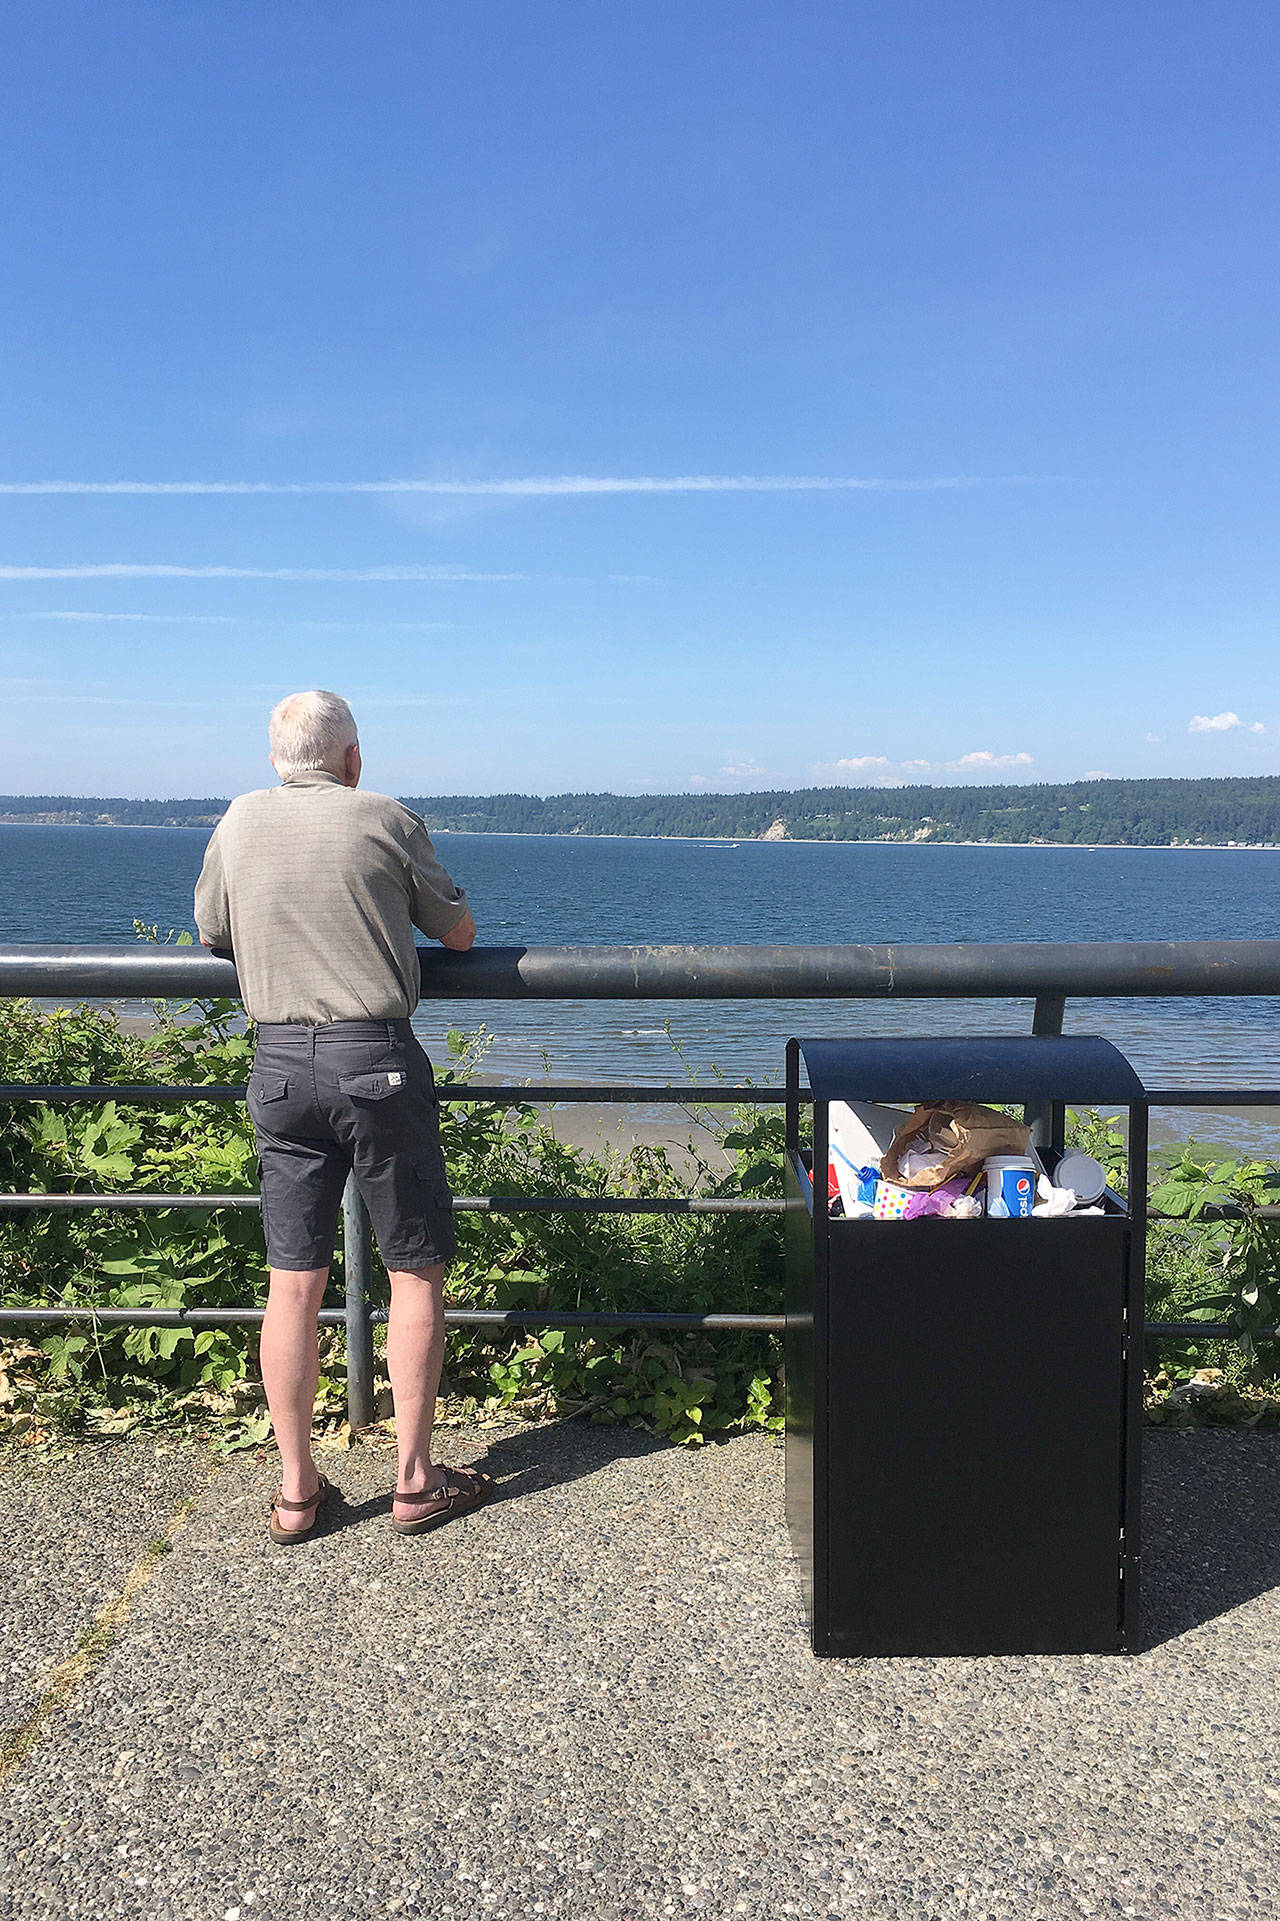 Contributed photo — An unidentified man looks across Saratoga Passage while standing next to an overflowing trash bin near Boy and Dog Park on Monday. Excess trash was the source of a headache for one business owner, while the public works department said it dropped the ball on ensuring the trash was clean.